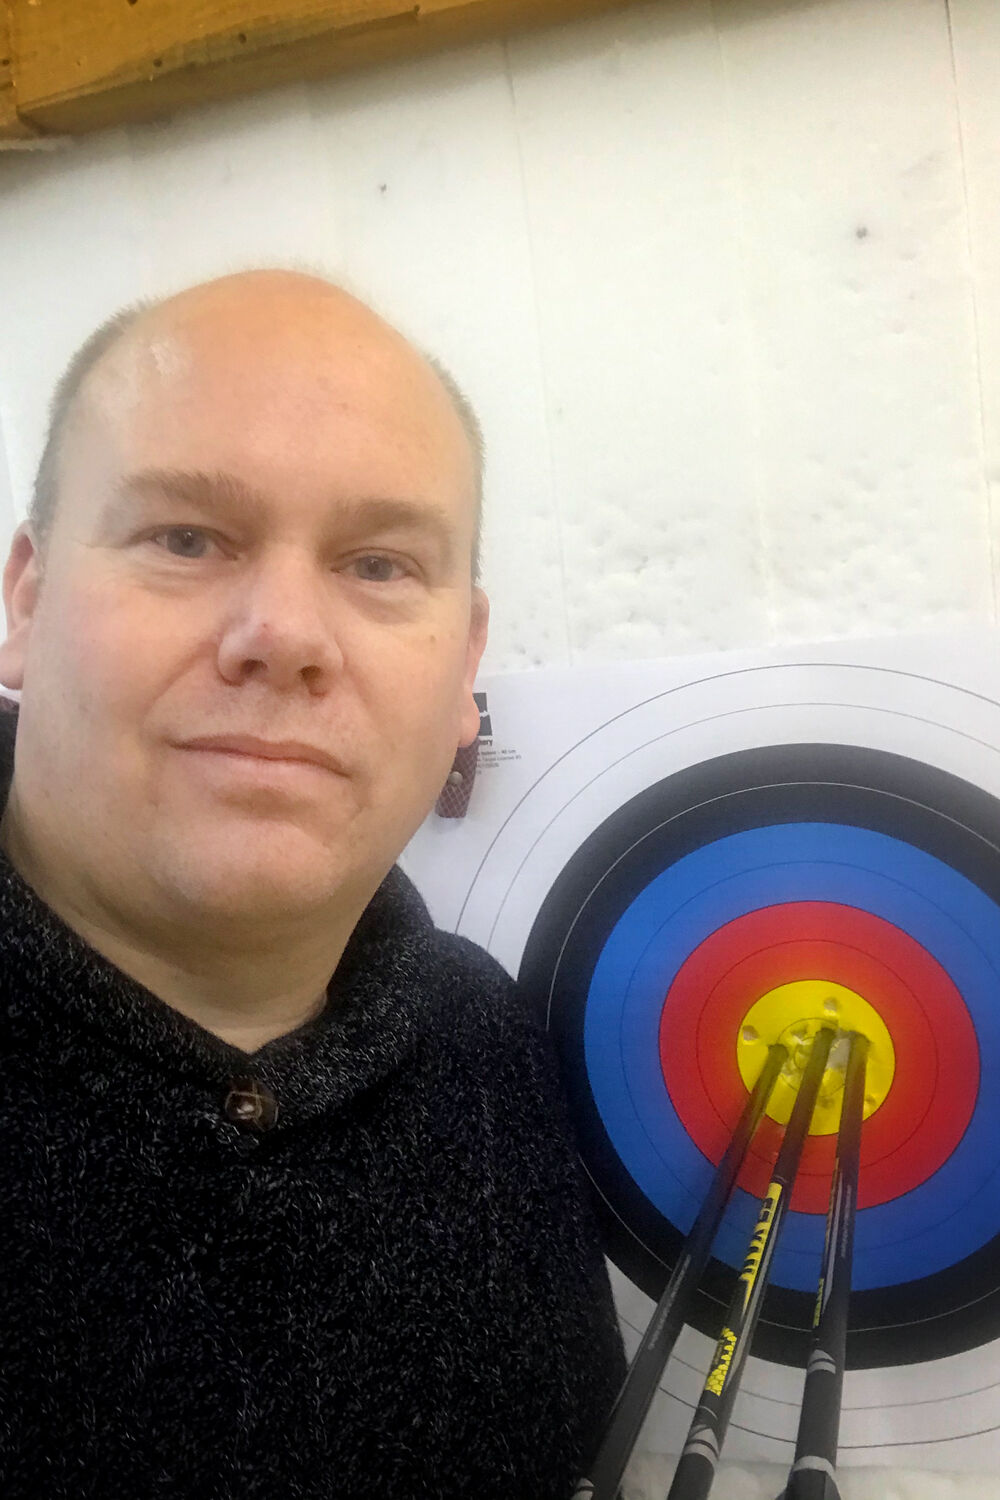 Erik Jonsson during the fourth remote stage of the 2021 Indoor Archery World Series.